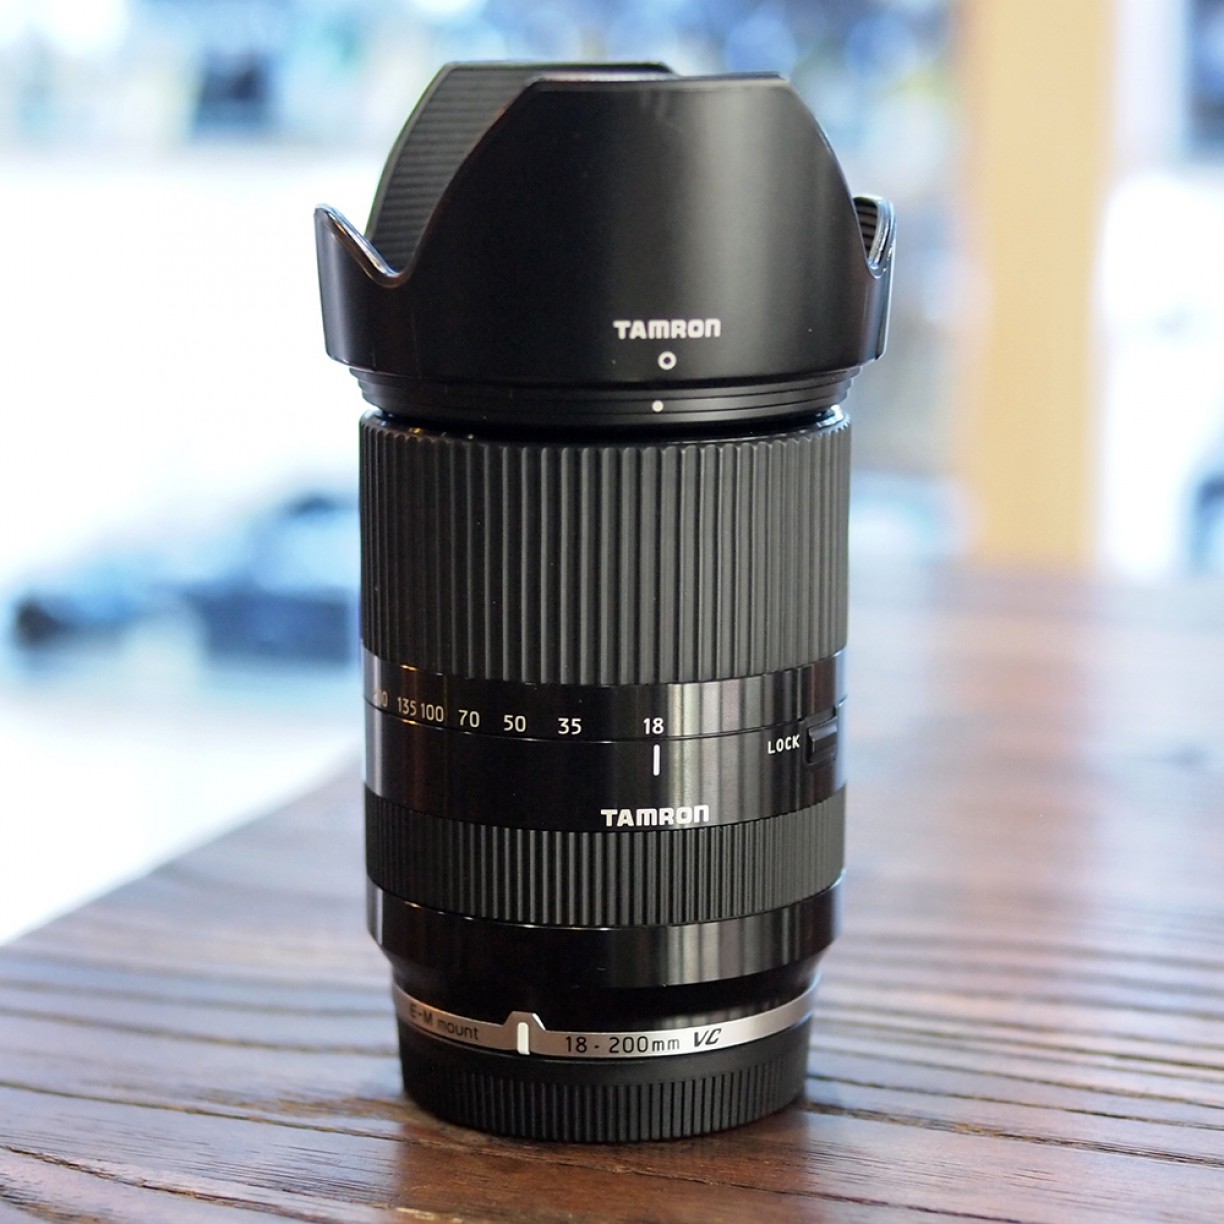 TAMRON 18-200MM F/3.5-6.3 VC FOR CANON EOS M- Good Condition - 2081